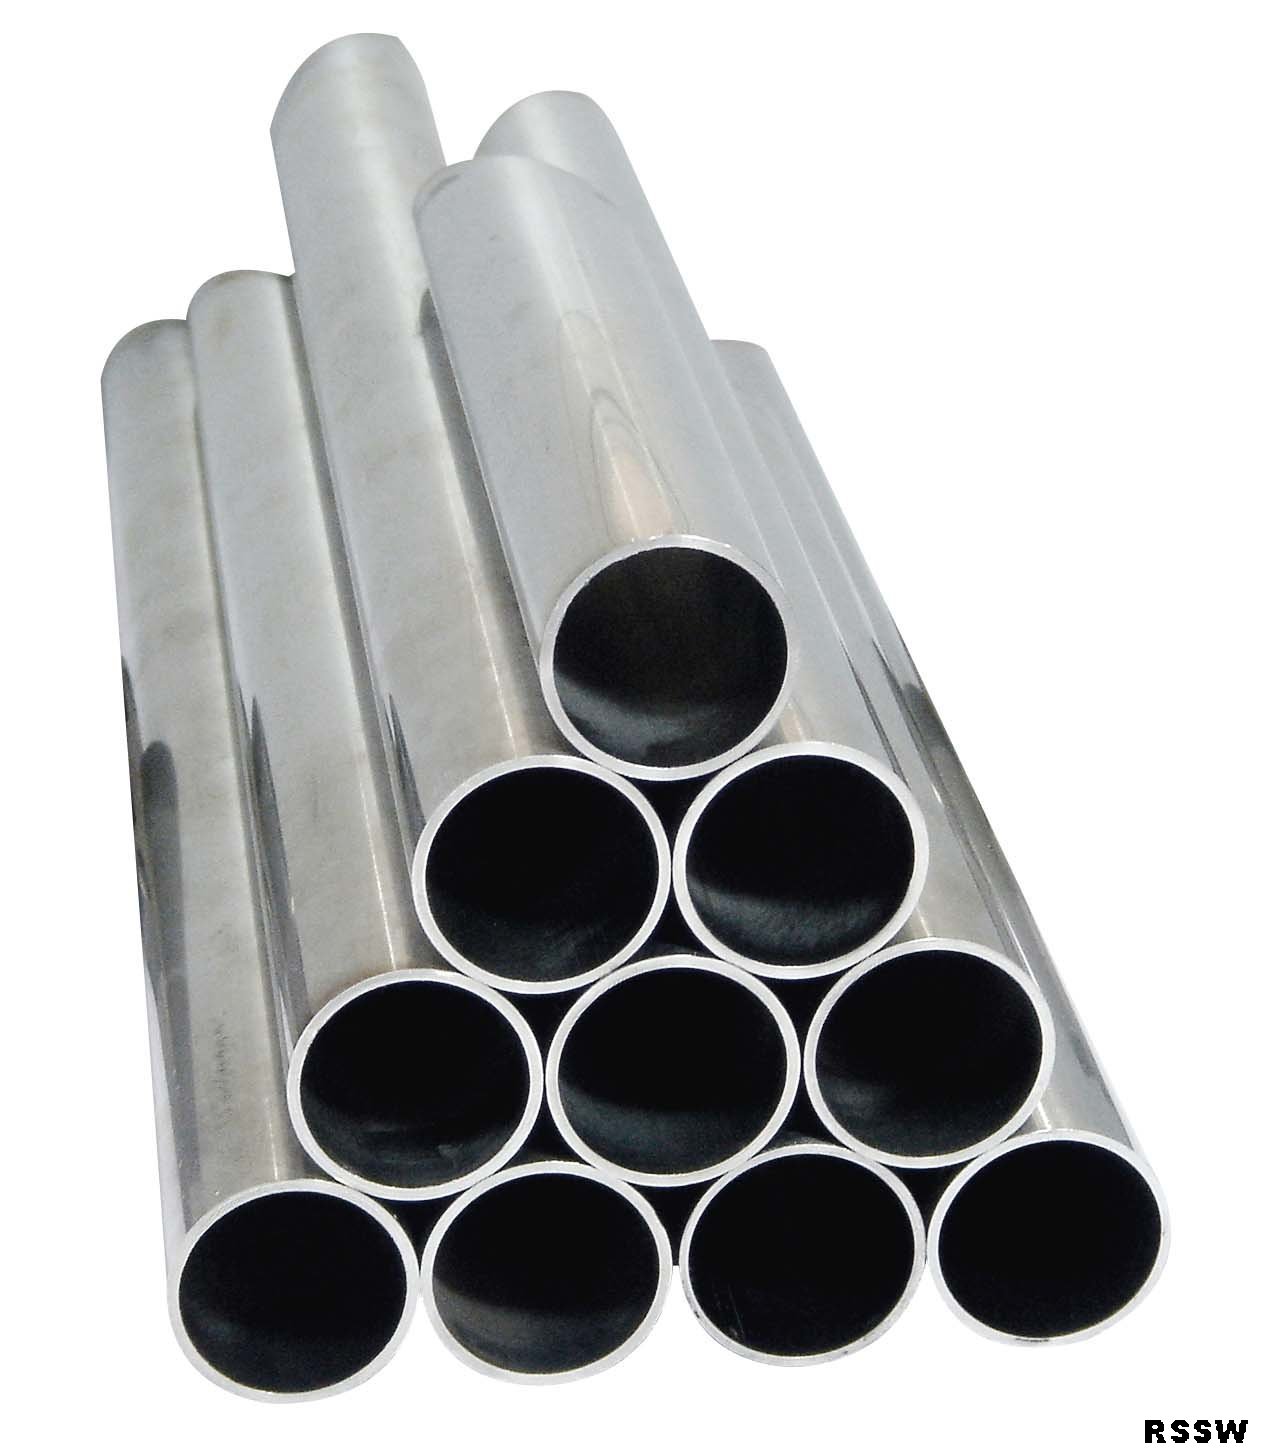 Carbon-Steel-Pipe